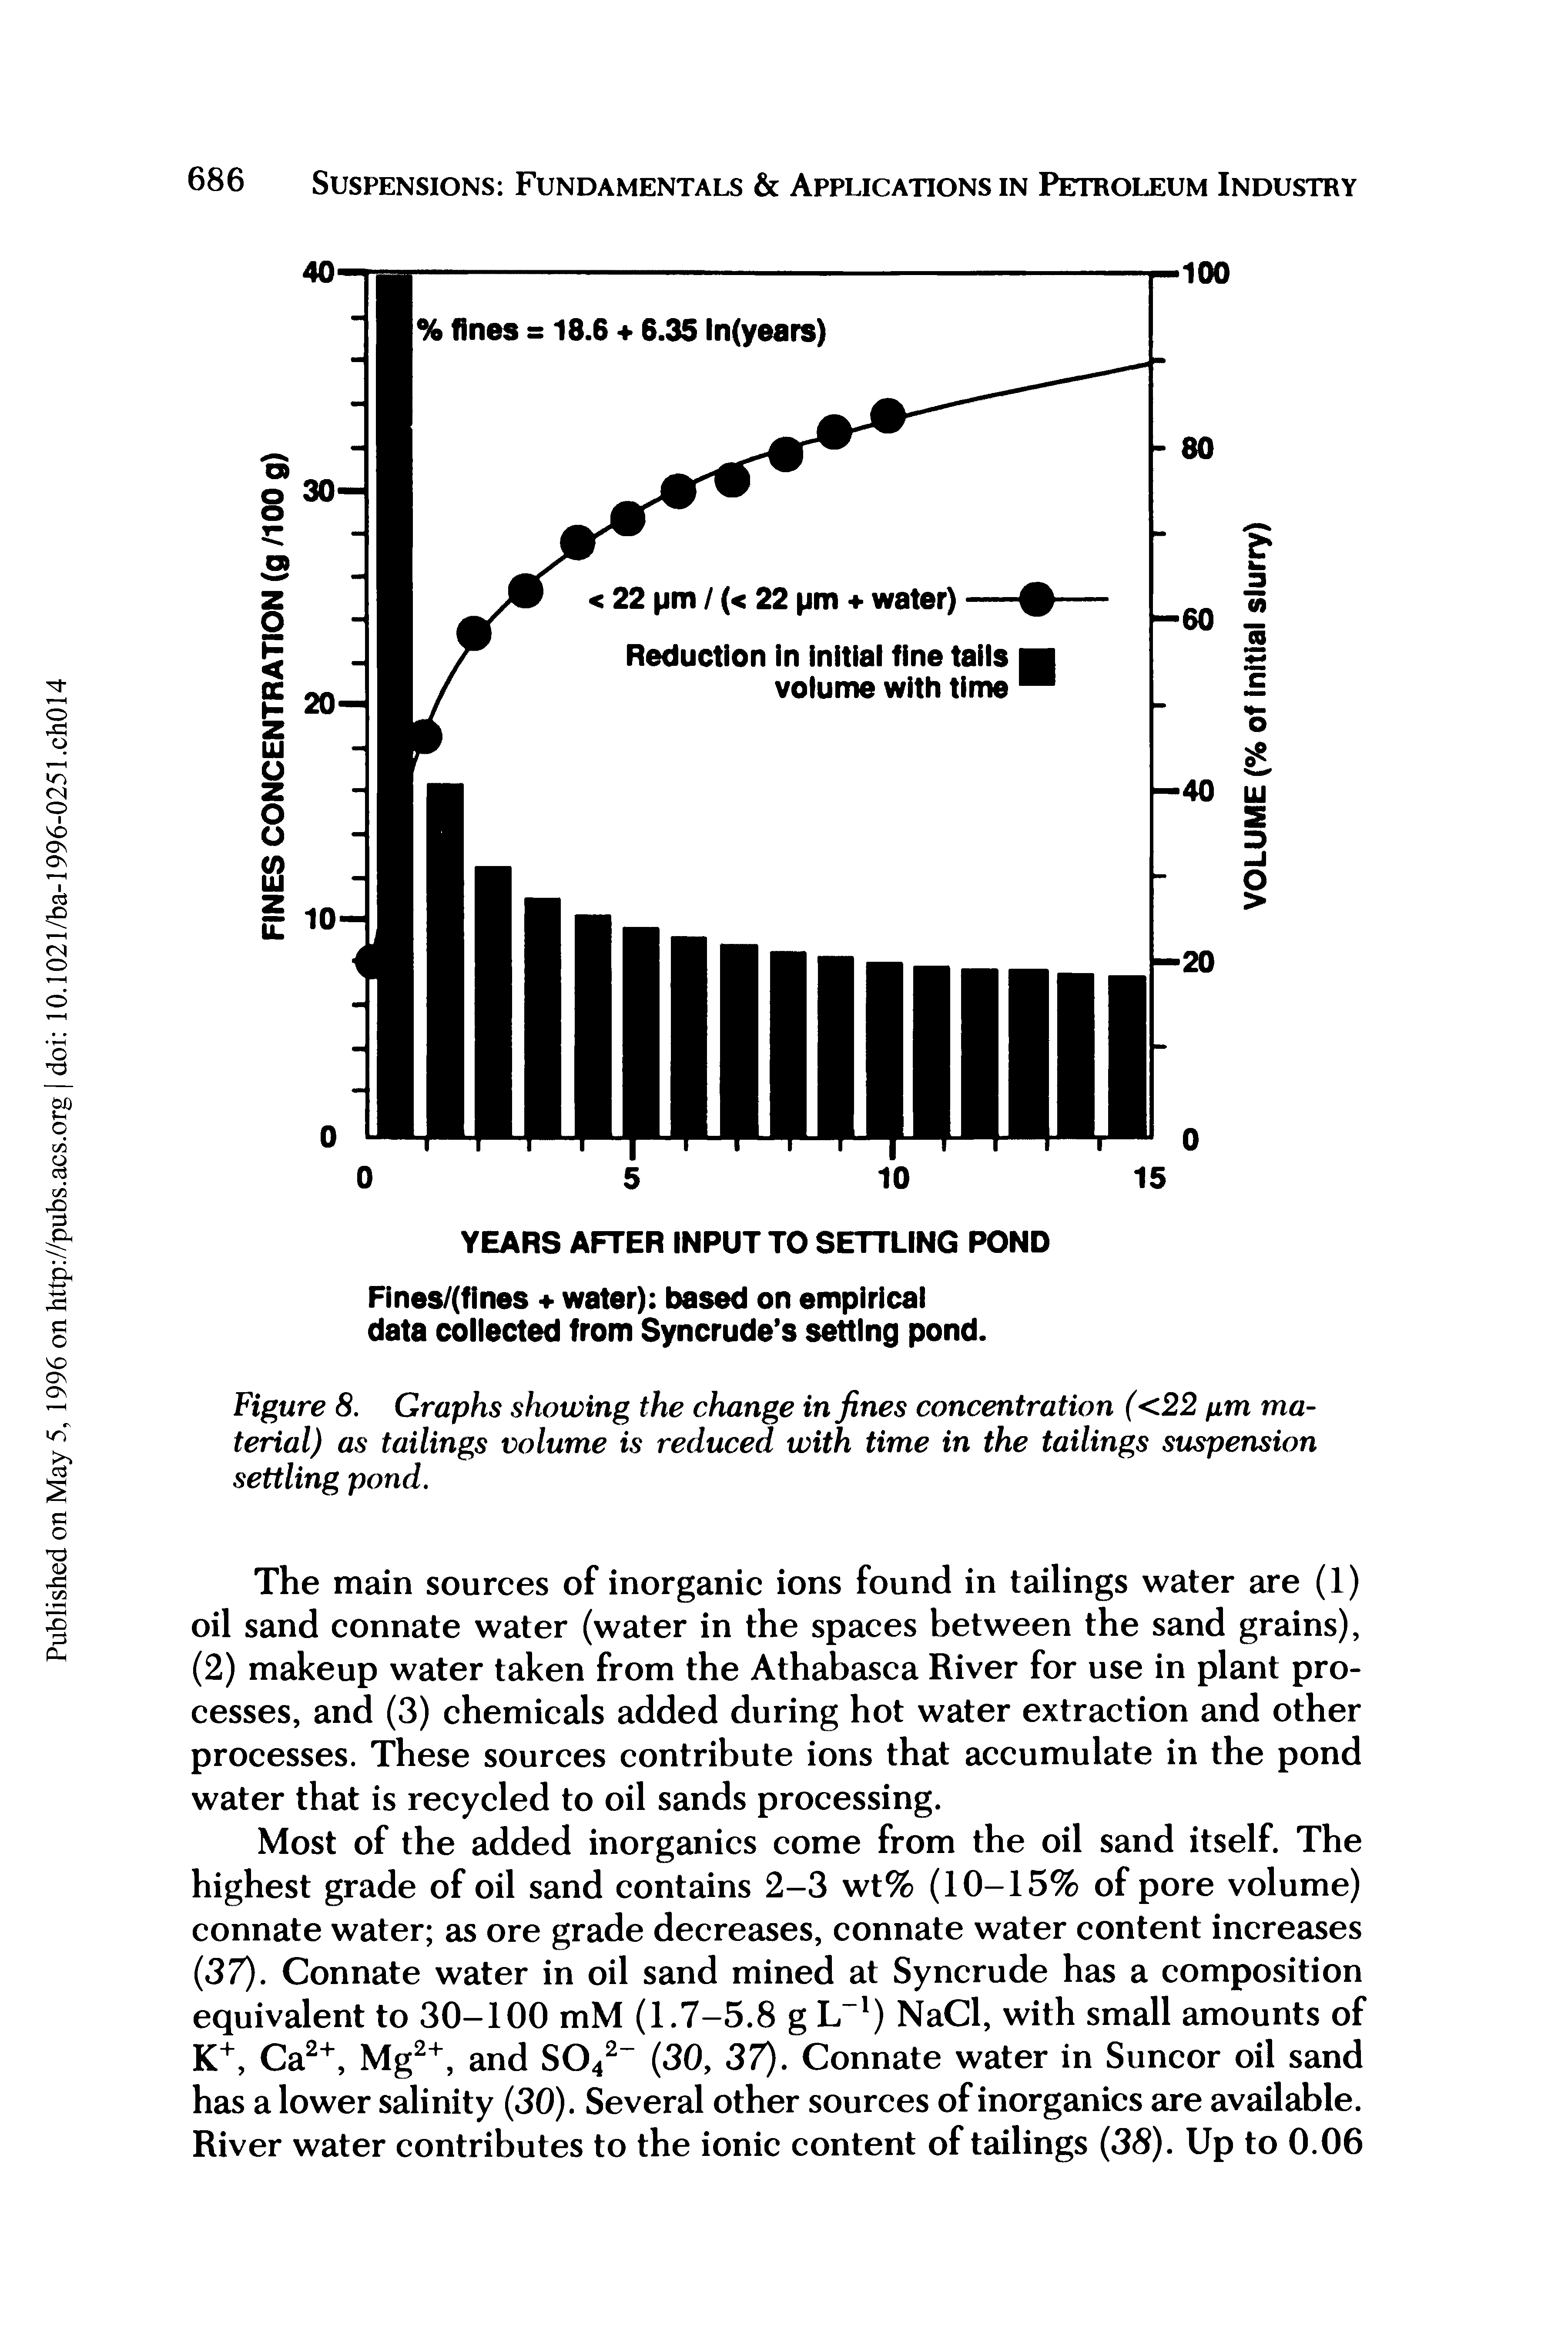 Figure 8. Graphs showing the change in fines concentration (<22 fim material) as tailings volume is reduced with time in the tailings suspension settling pond.